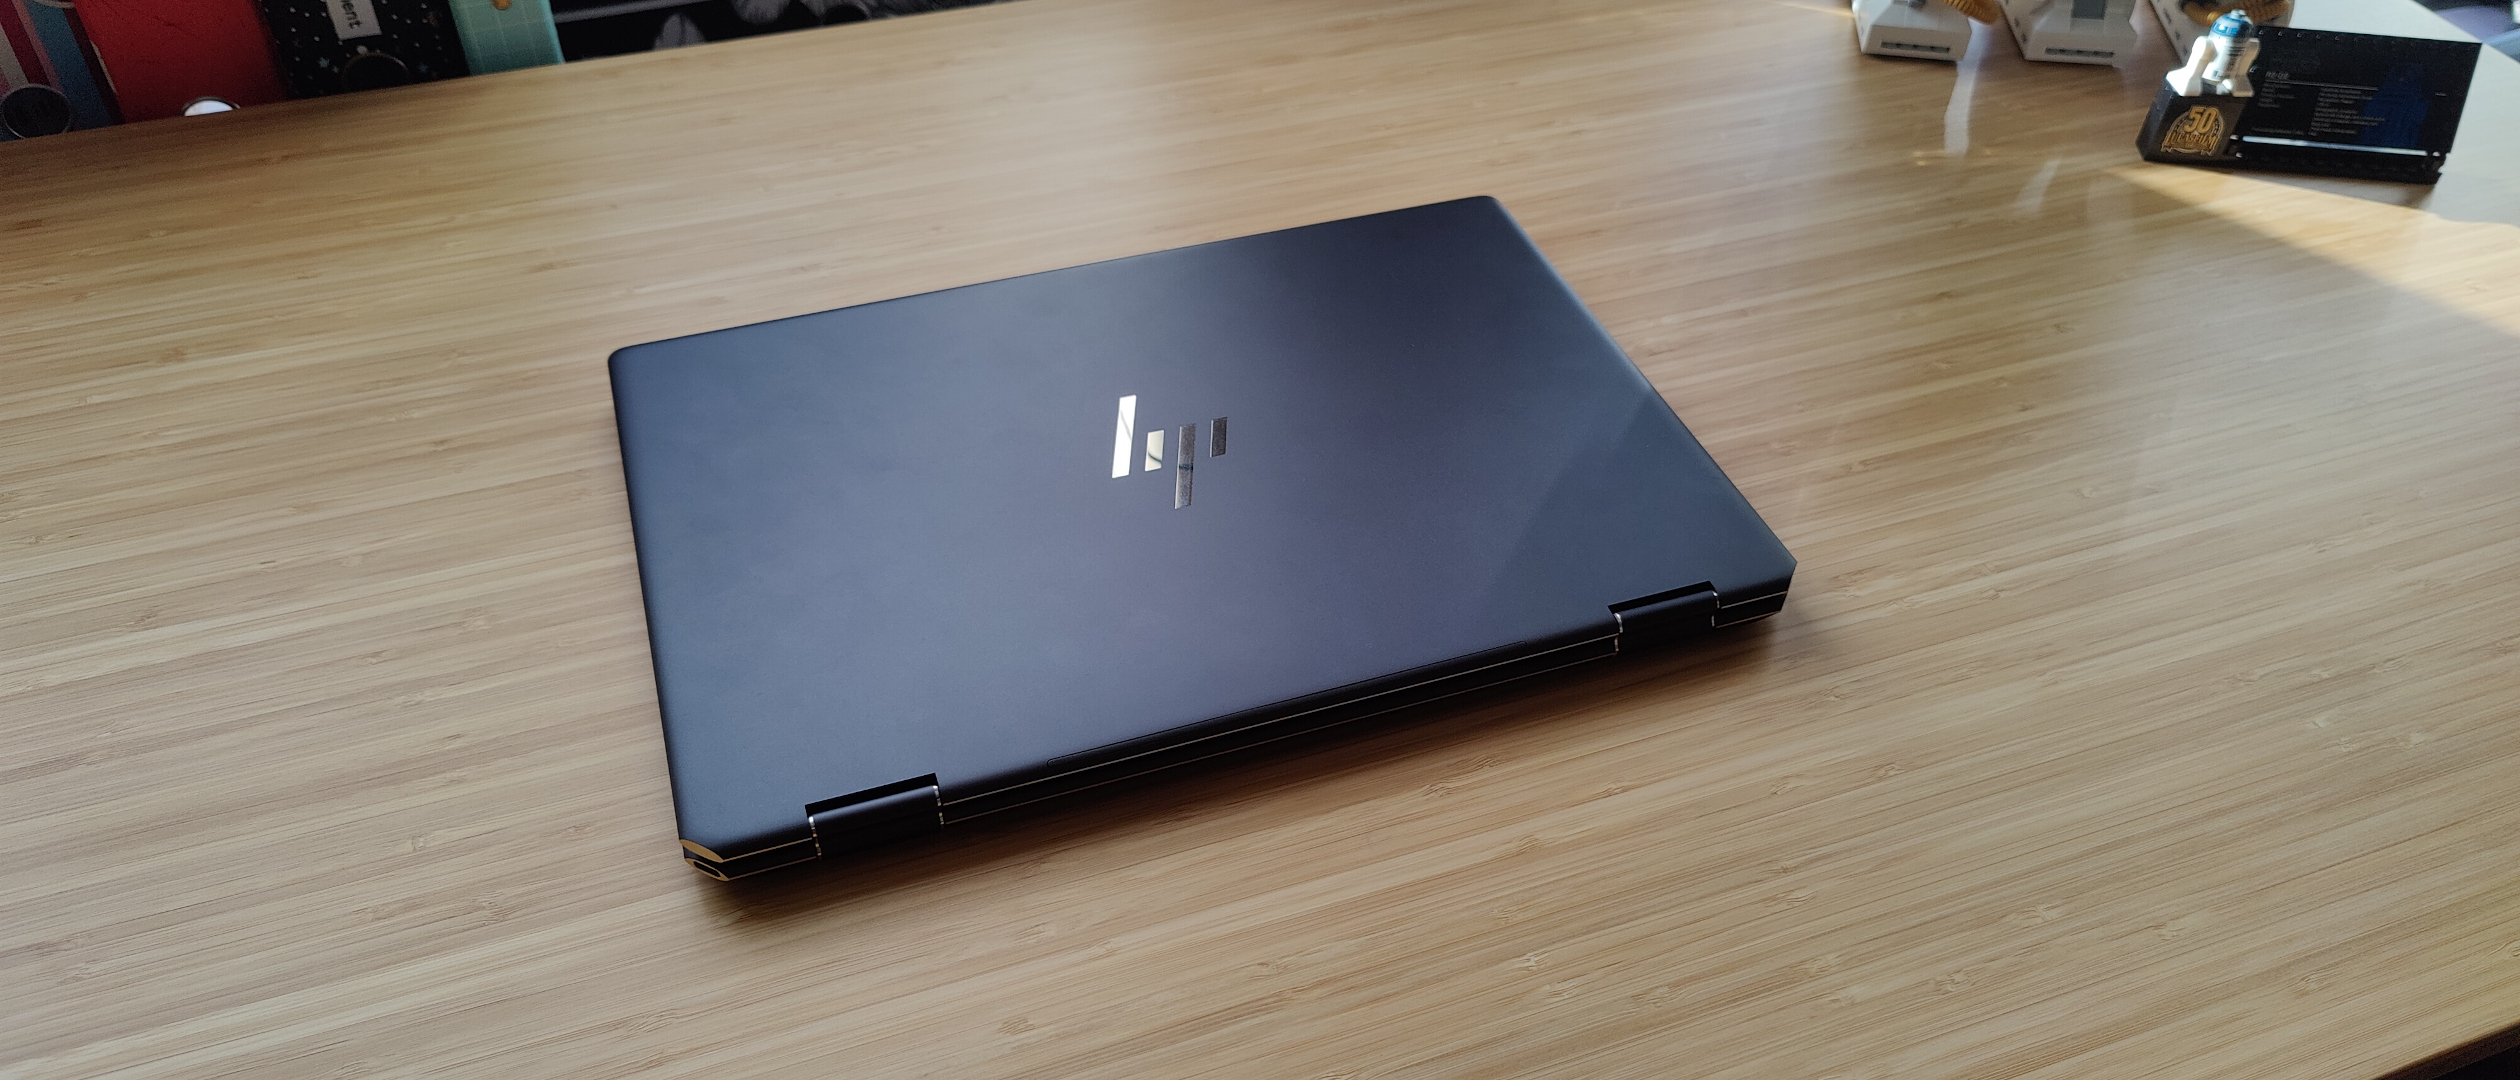 2022 HP Spectre x360 16 Review - OLED + RTX 